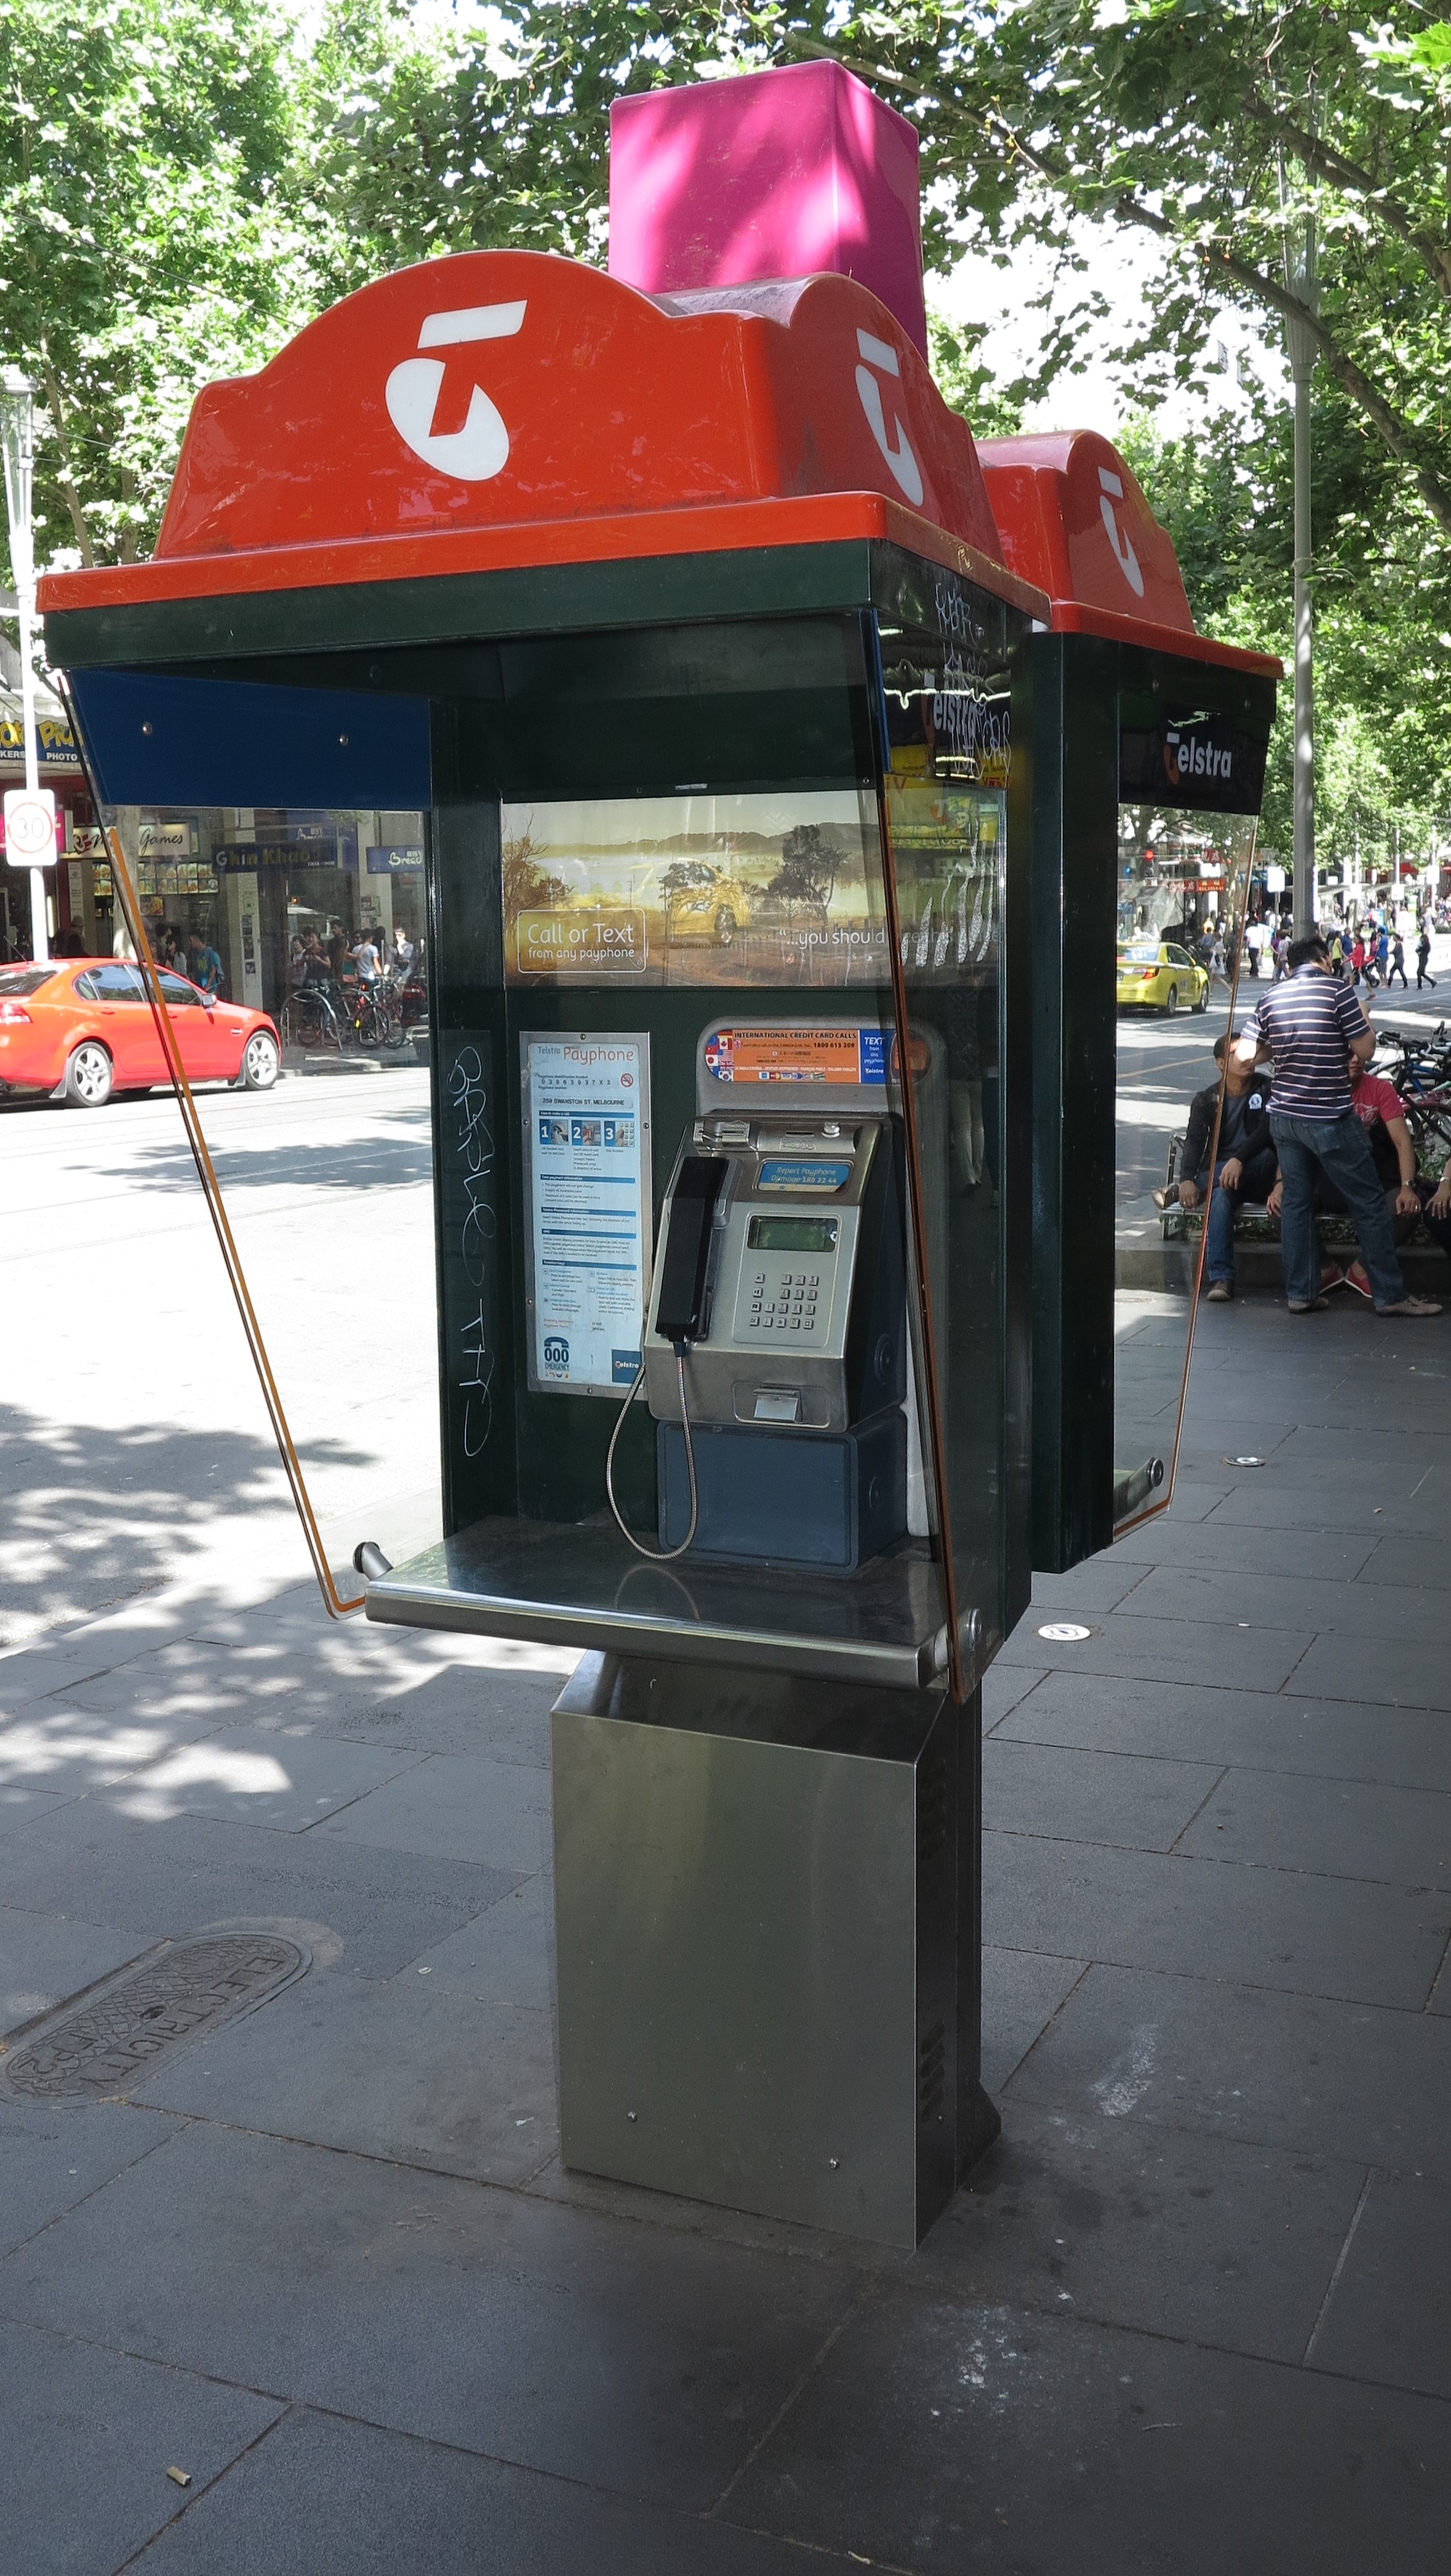 Public phone booths becoming public Wi-Fi hotspots